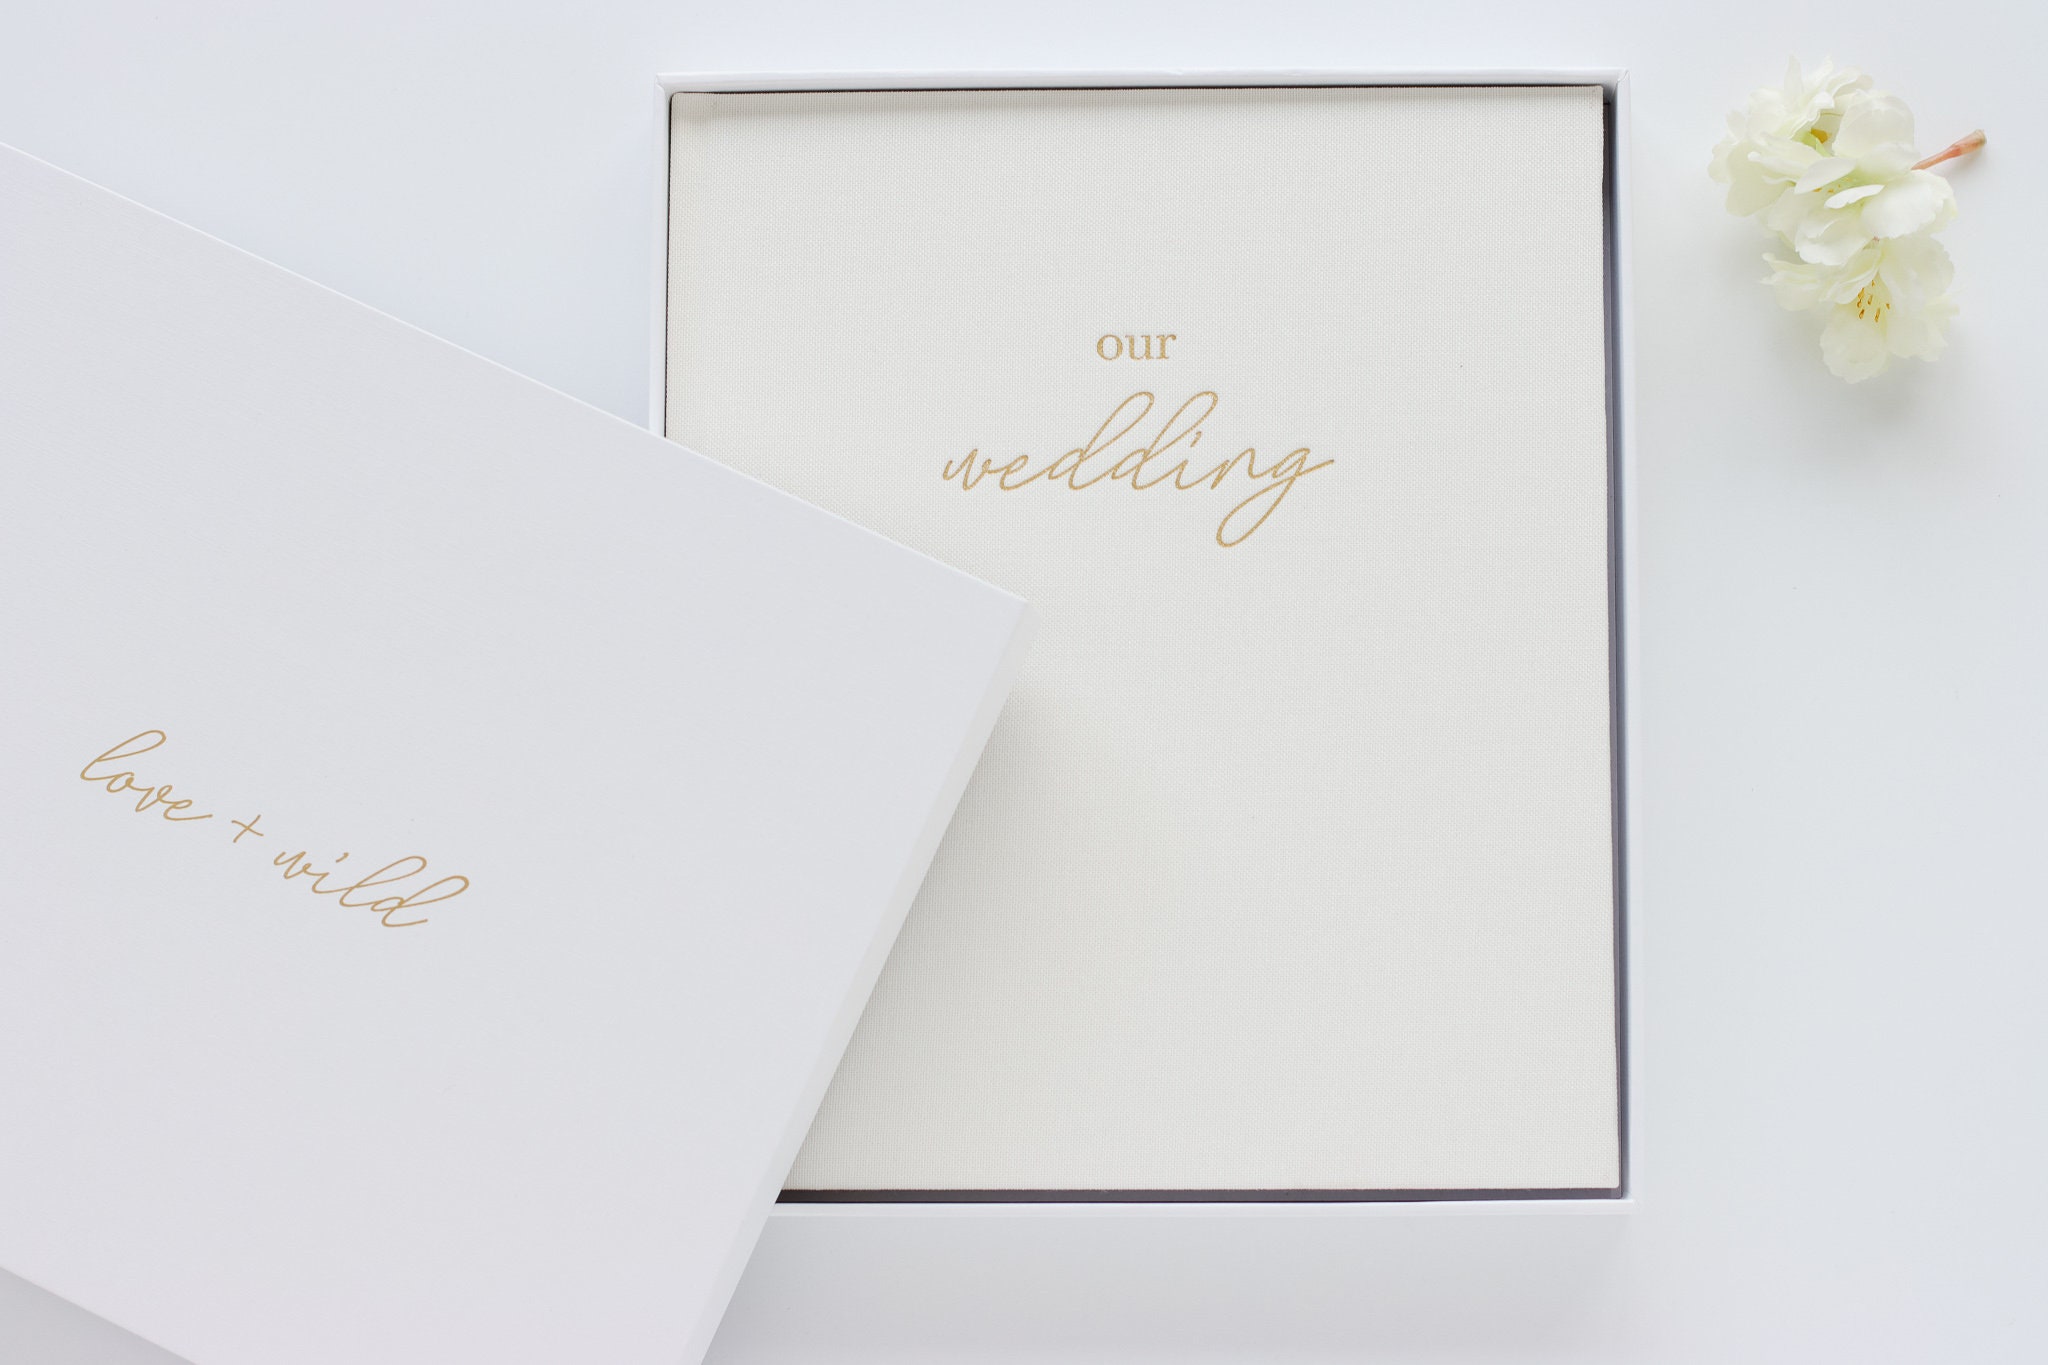 Scrapbook With Clear Sleeves, the Perfect Wedding Scrapbook Album by  Clairemagnolia 